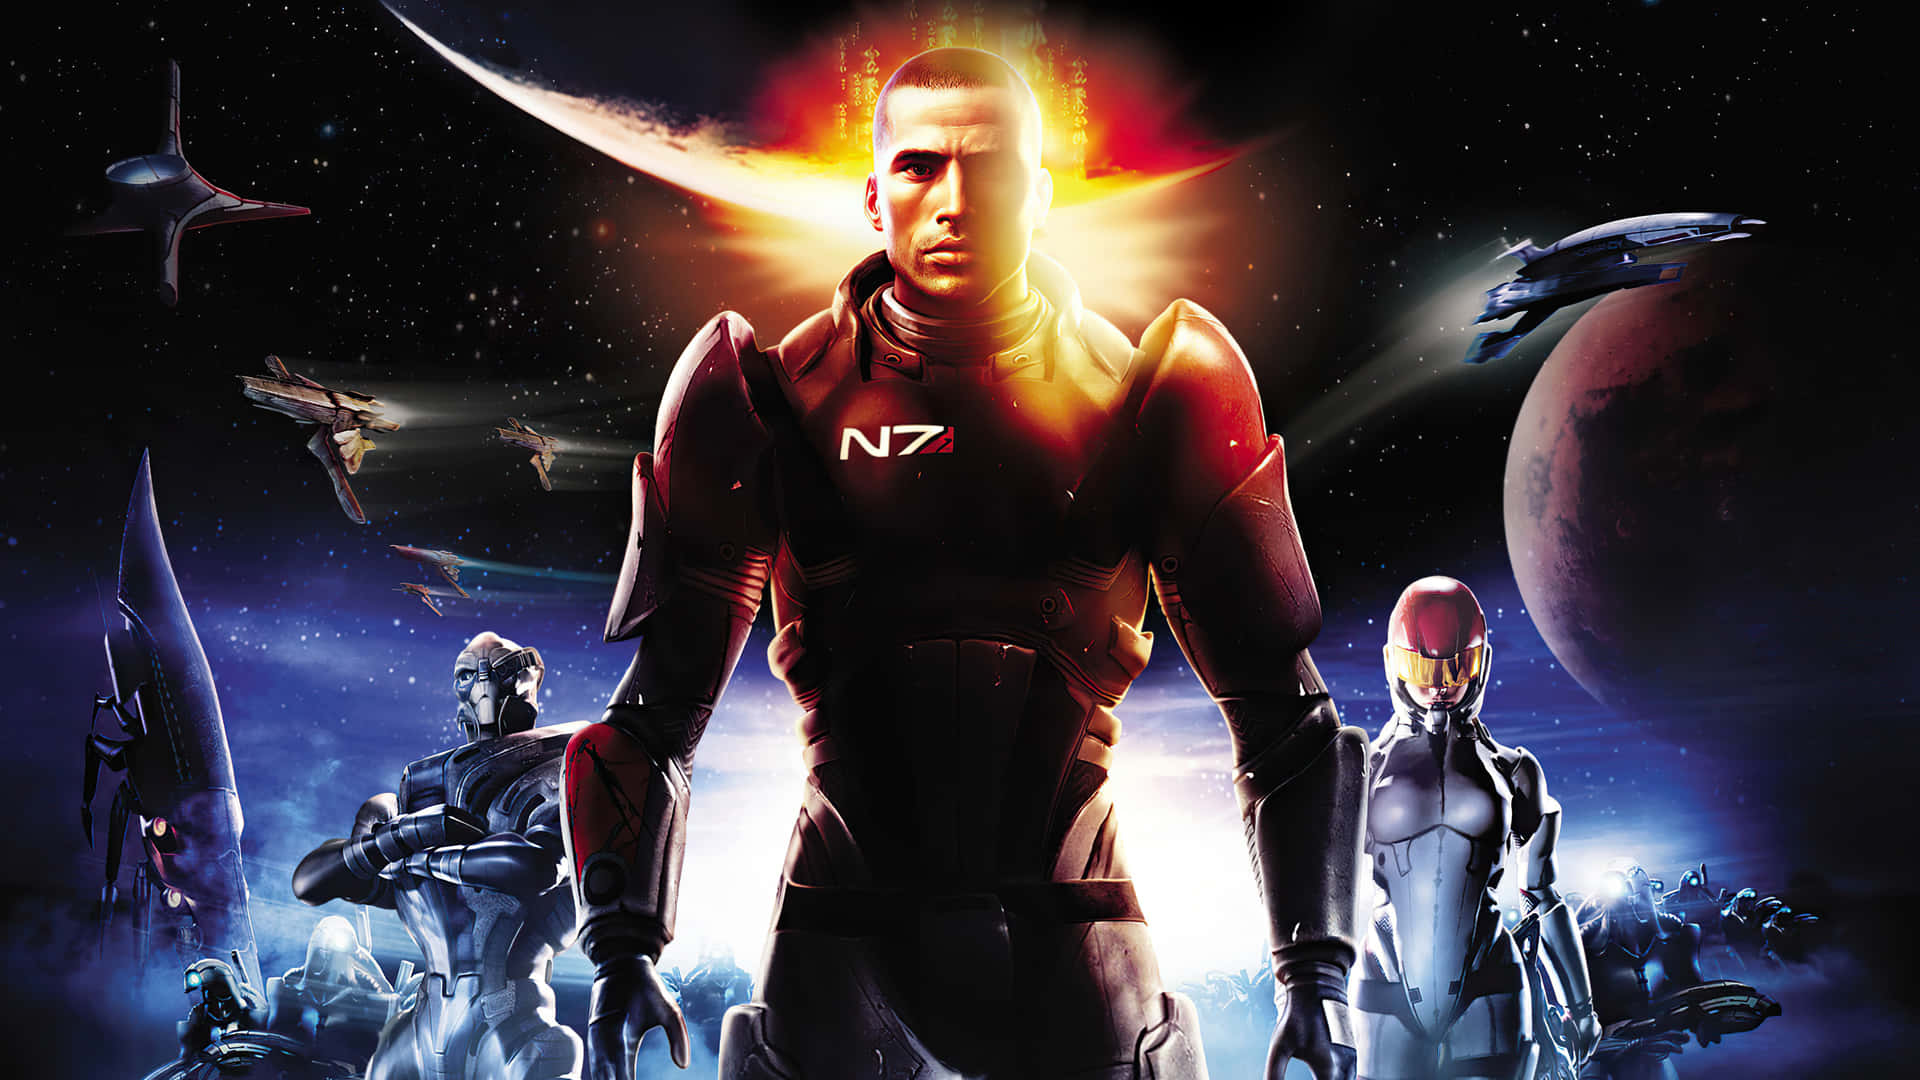 Mass Effect Legendary Edition immersive gaming experience Wallpaper